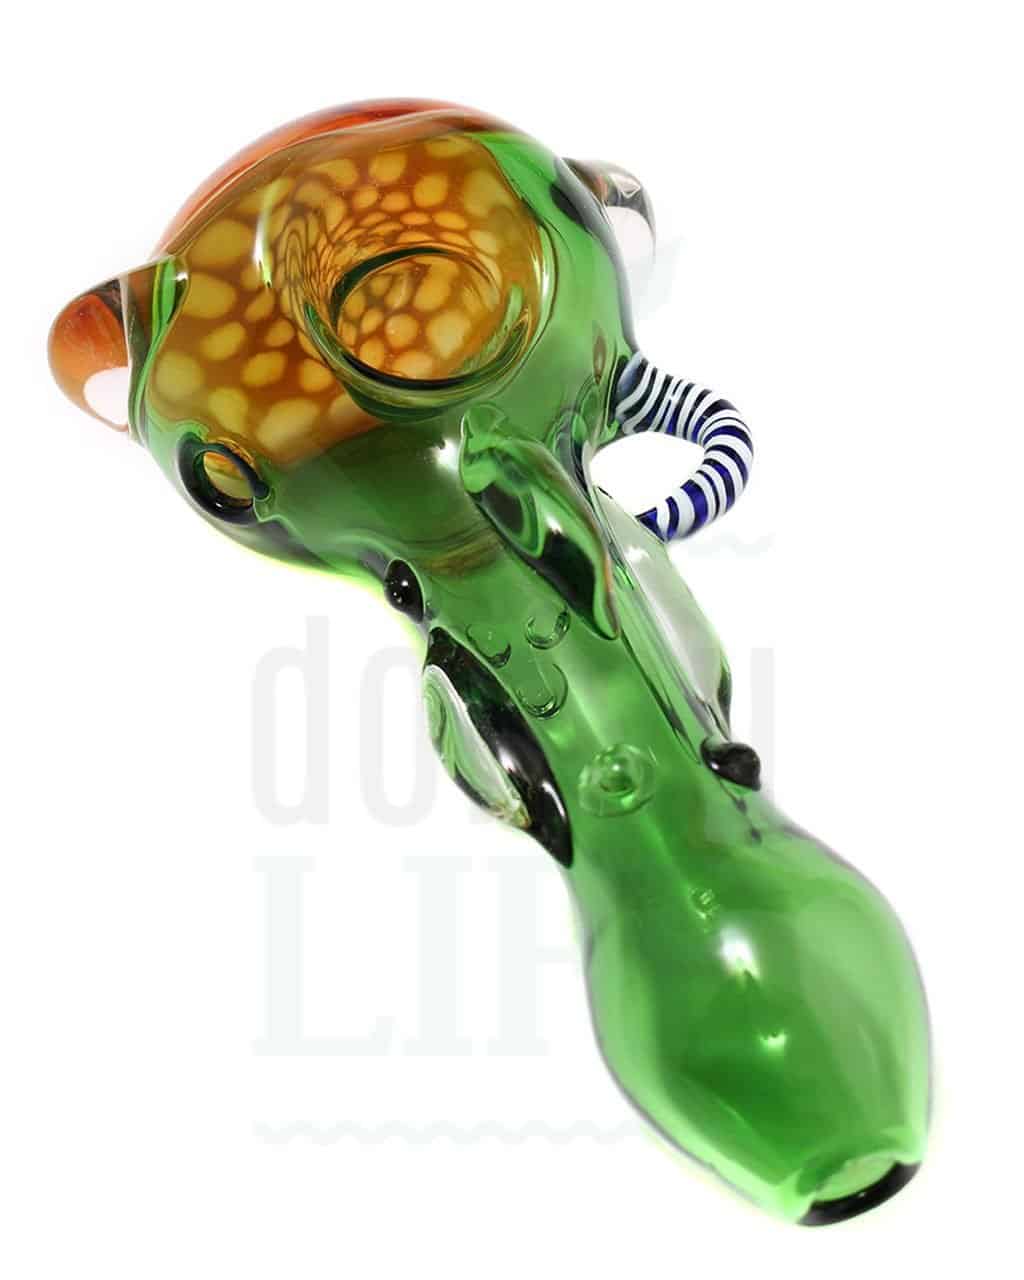 Glass Pipes Basil Bush Spoon Pipe "Iris 5" with Handle